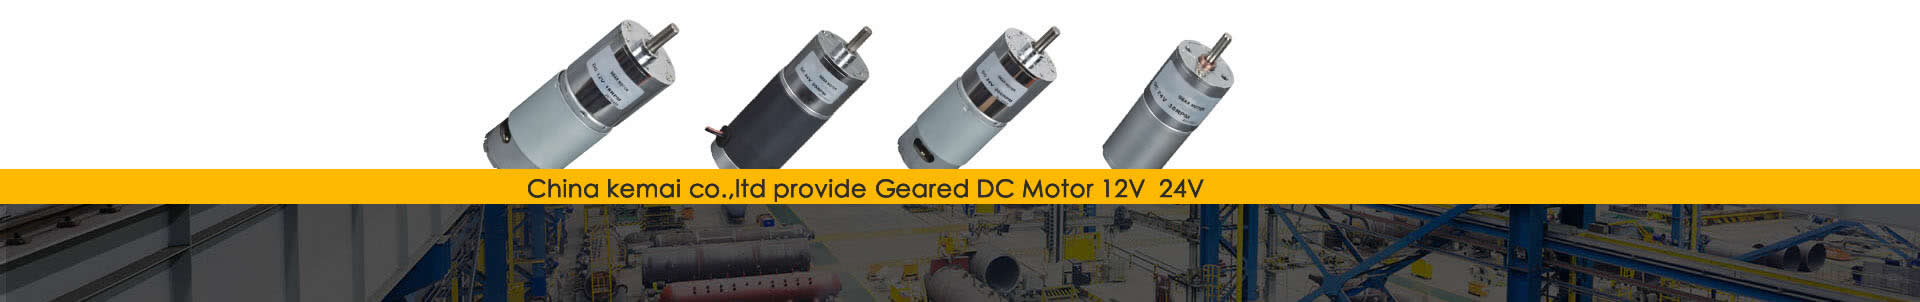 Small geared dc motor price & manufacturer